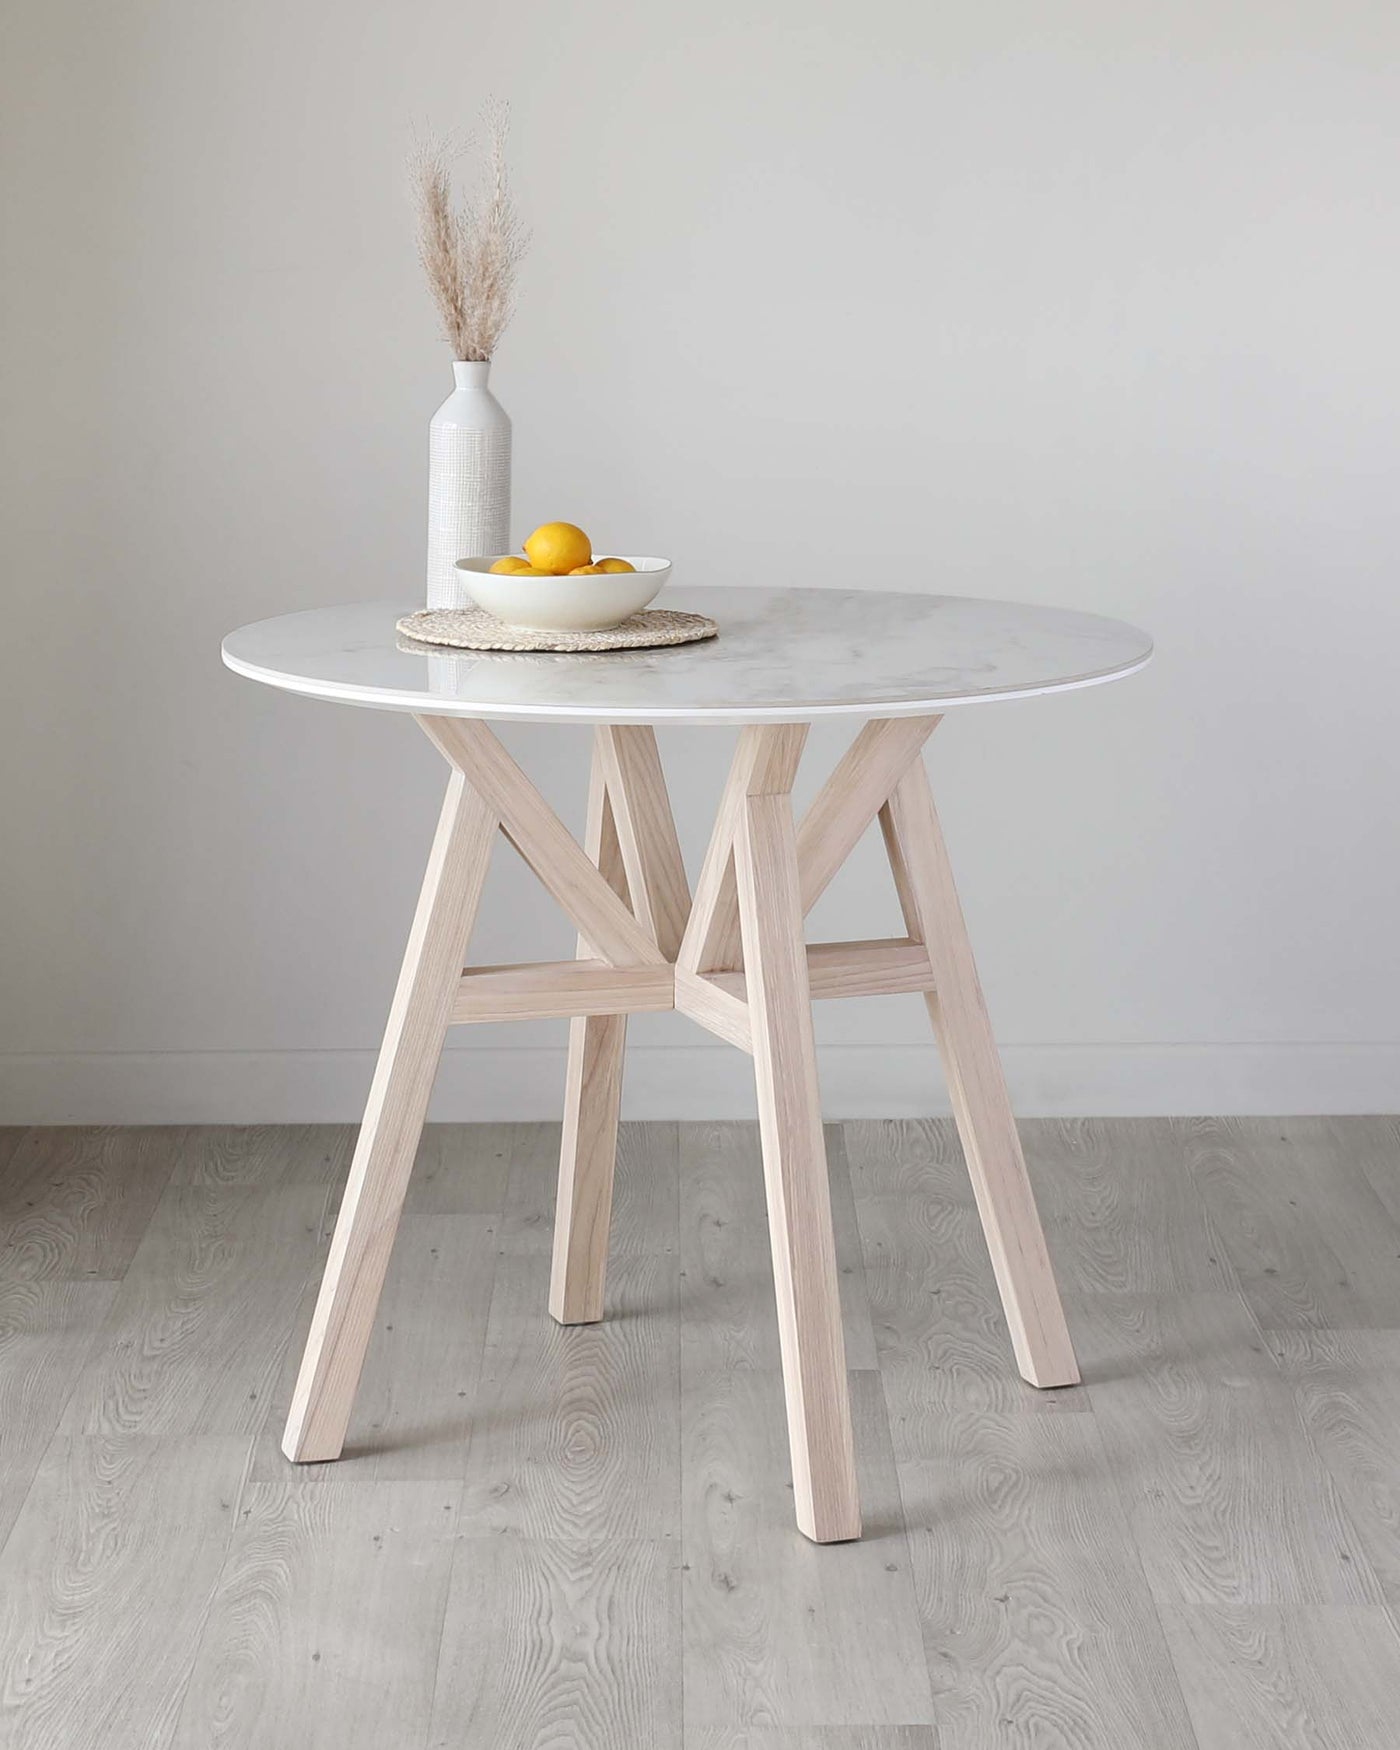 Round marble-top table with a unique wooden base consisting of interlocking timber legs in a light natural finish, displayed on a grey laminate floor against a plain light grey wall.